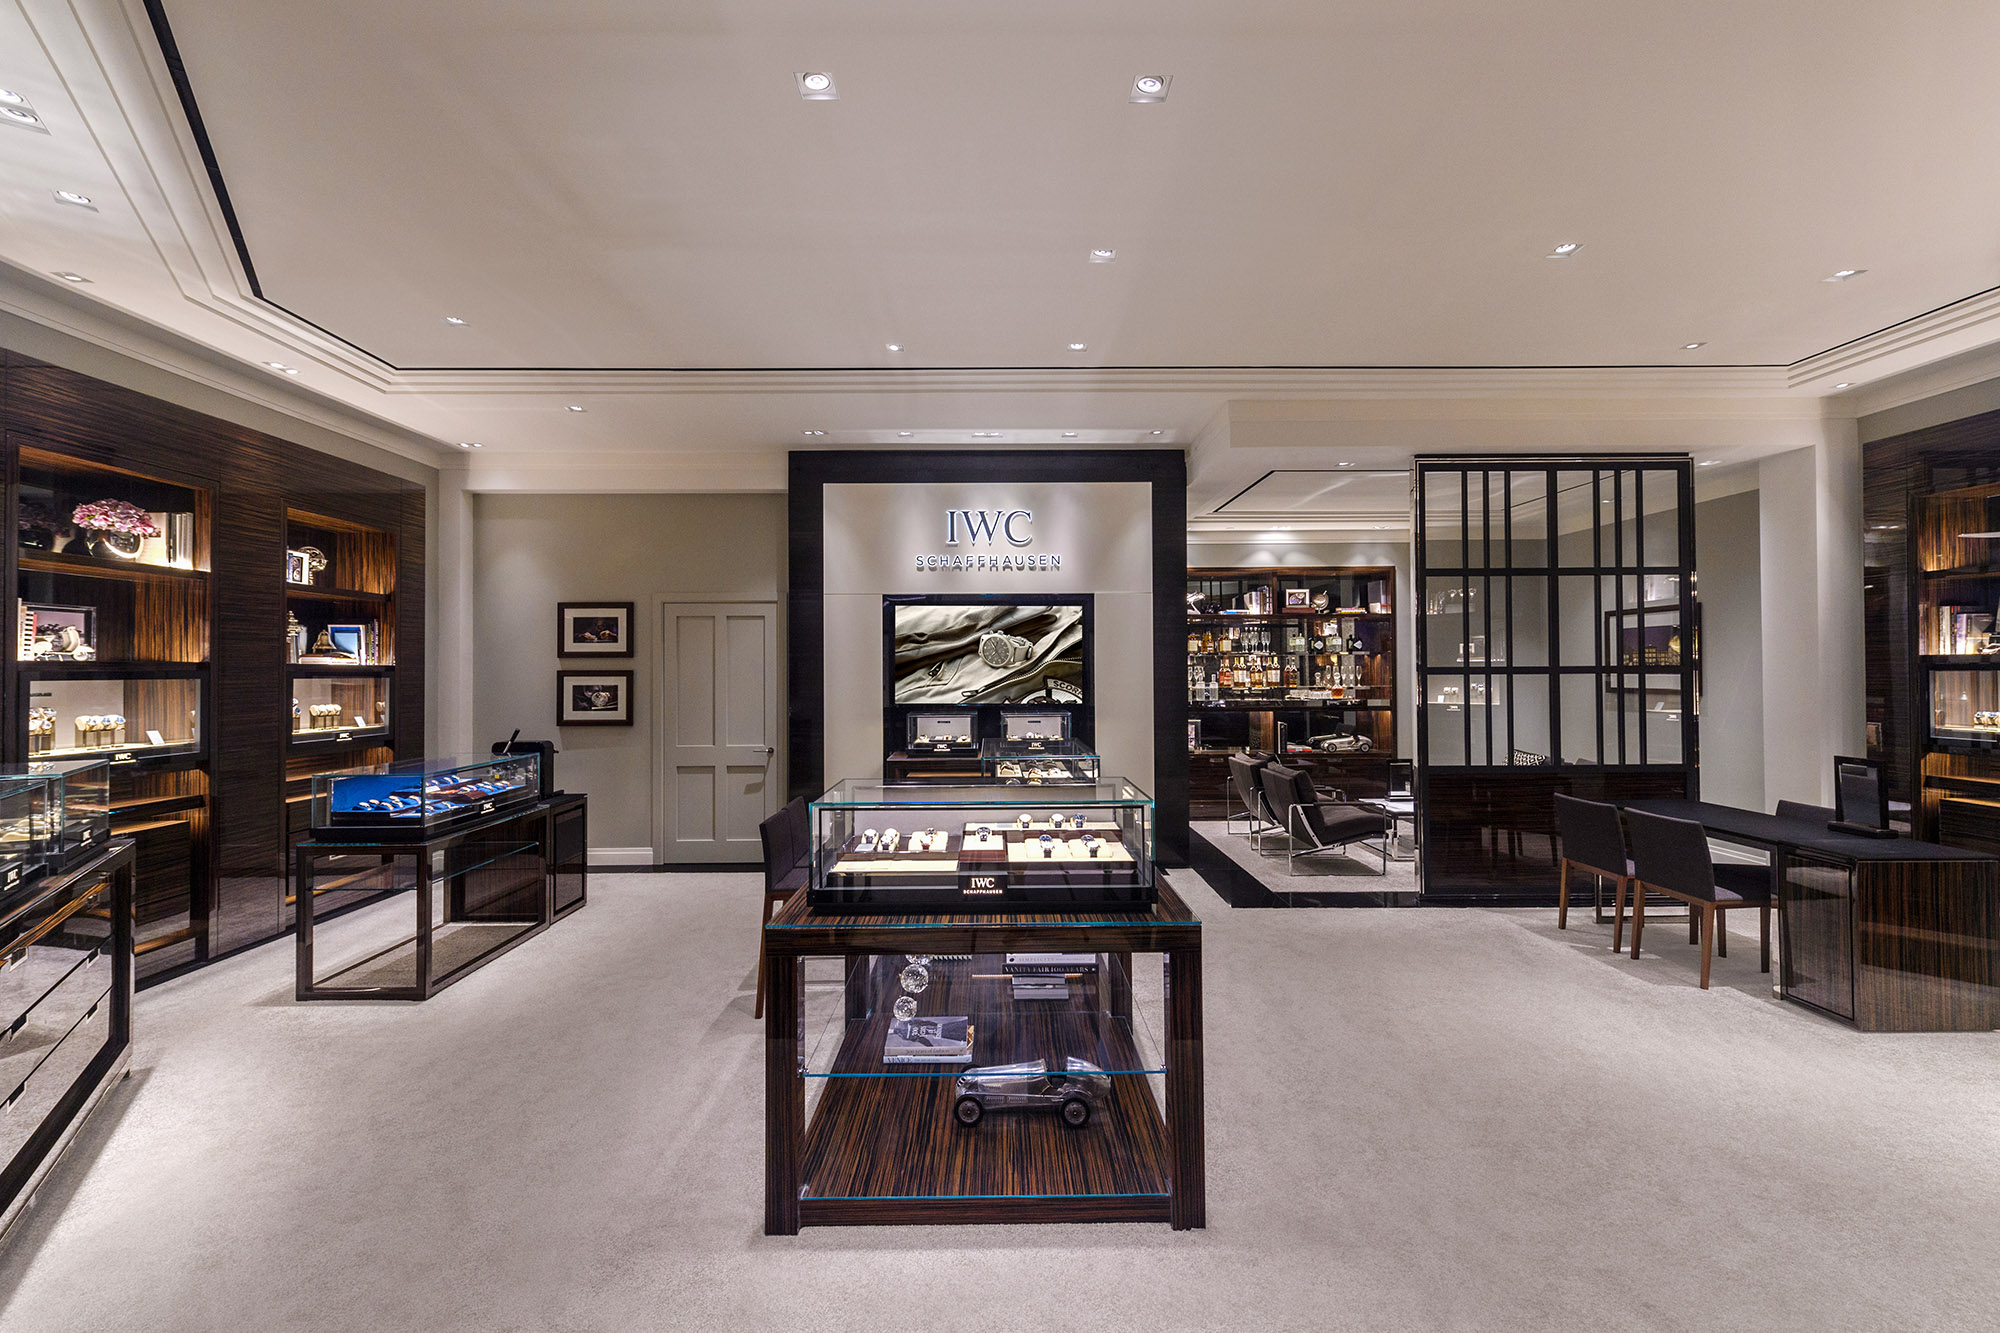 The IWC Boutique in ION Orchard, Singapore. The virtual retail boutique allows you to digitally move about the store in exactly the same way as the physical retail space. - www.revolution.watch